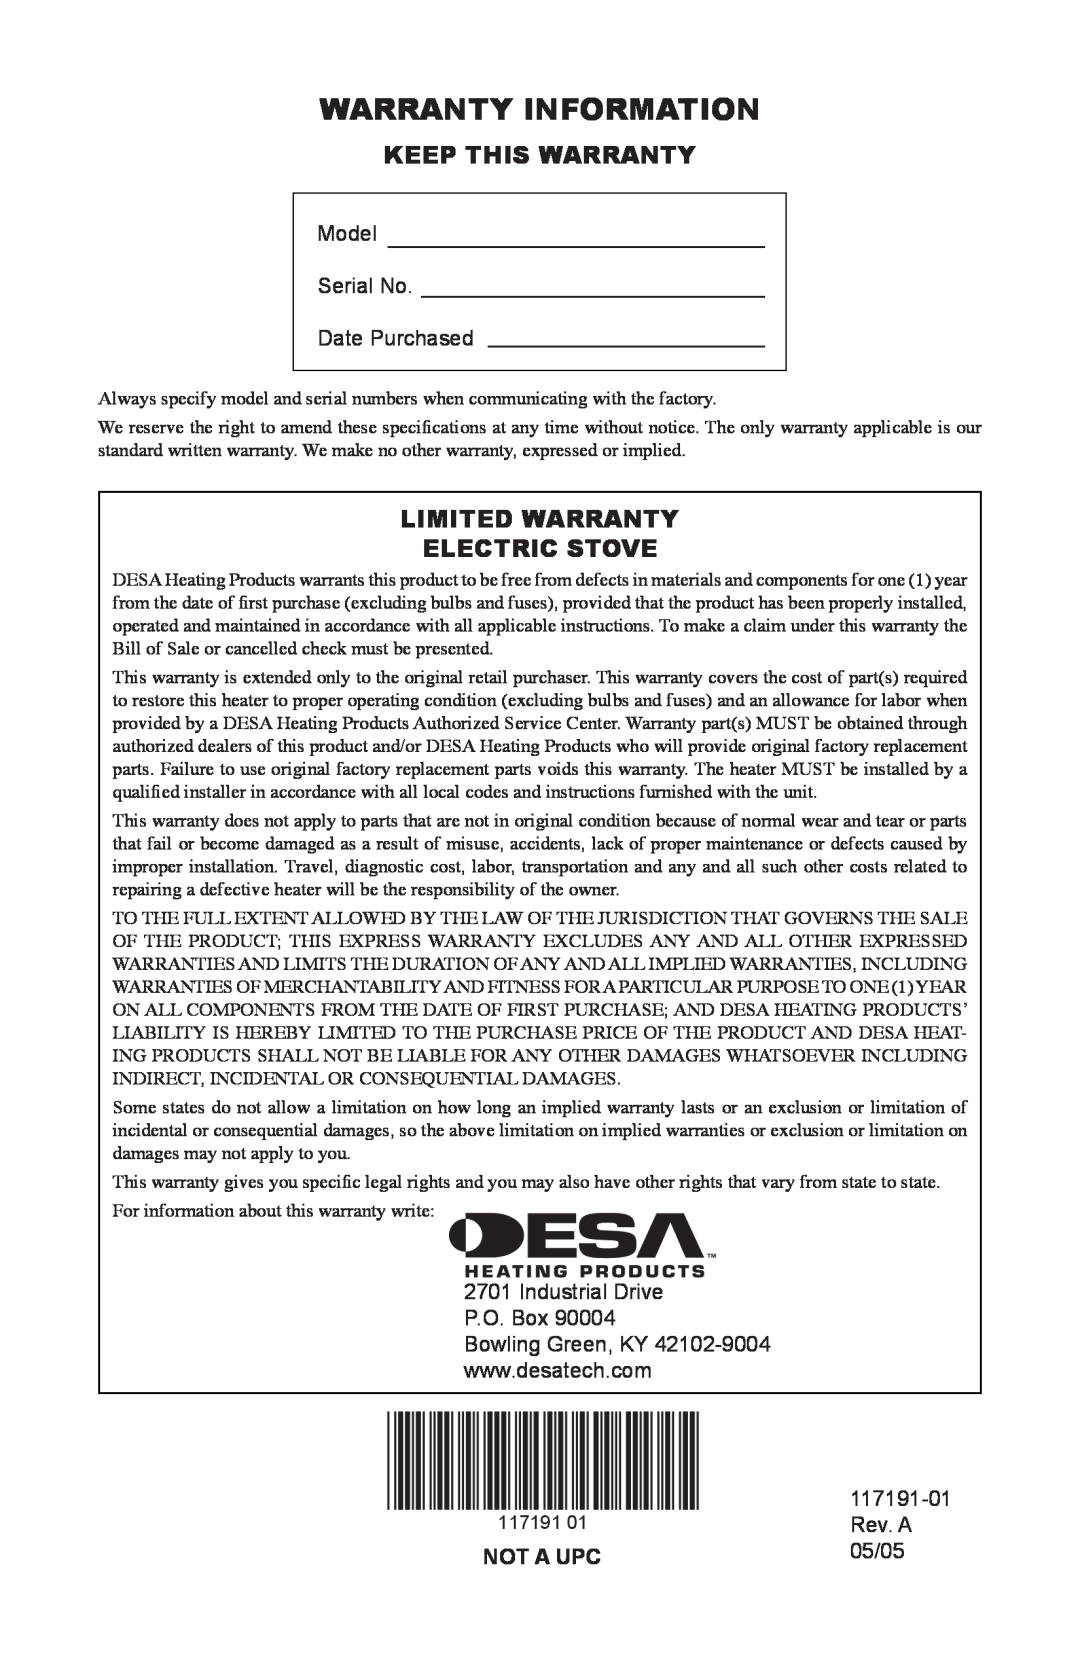 Desa CGESBM operation manual Warranty Information, Keep This Warranty, Limited Warranty Electric Stove, Not A Upc 